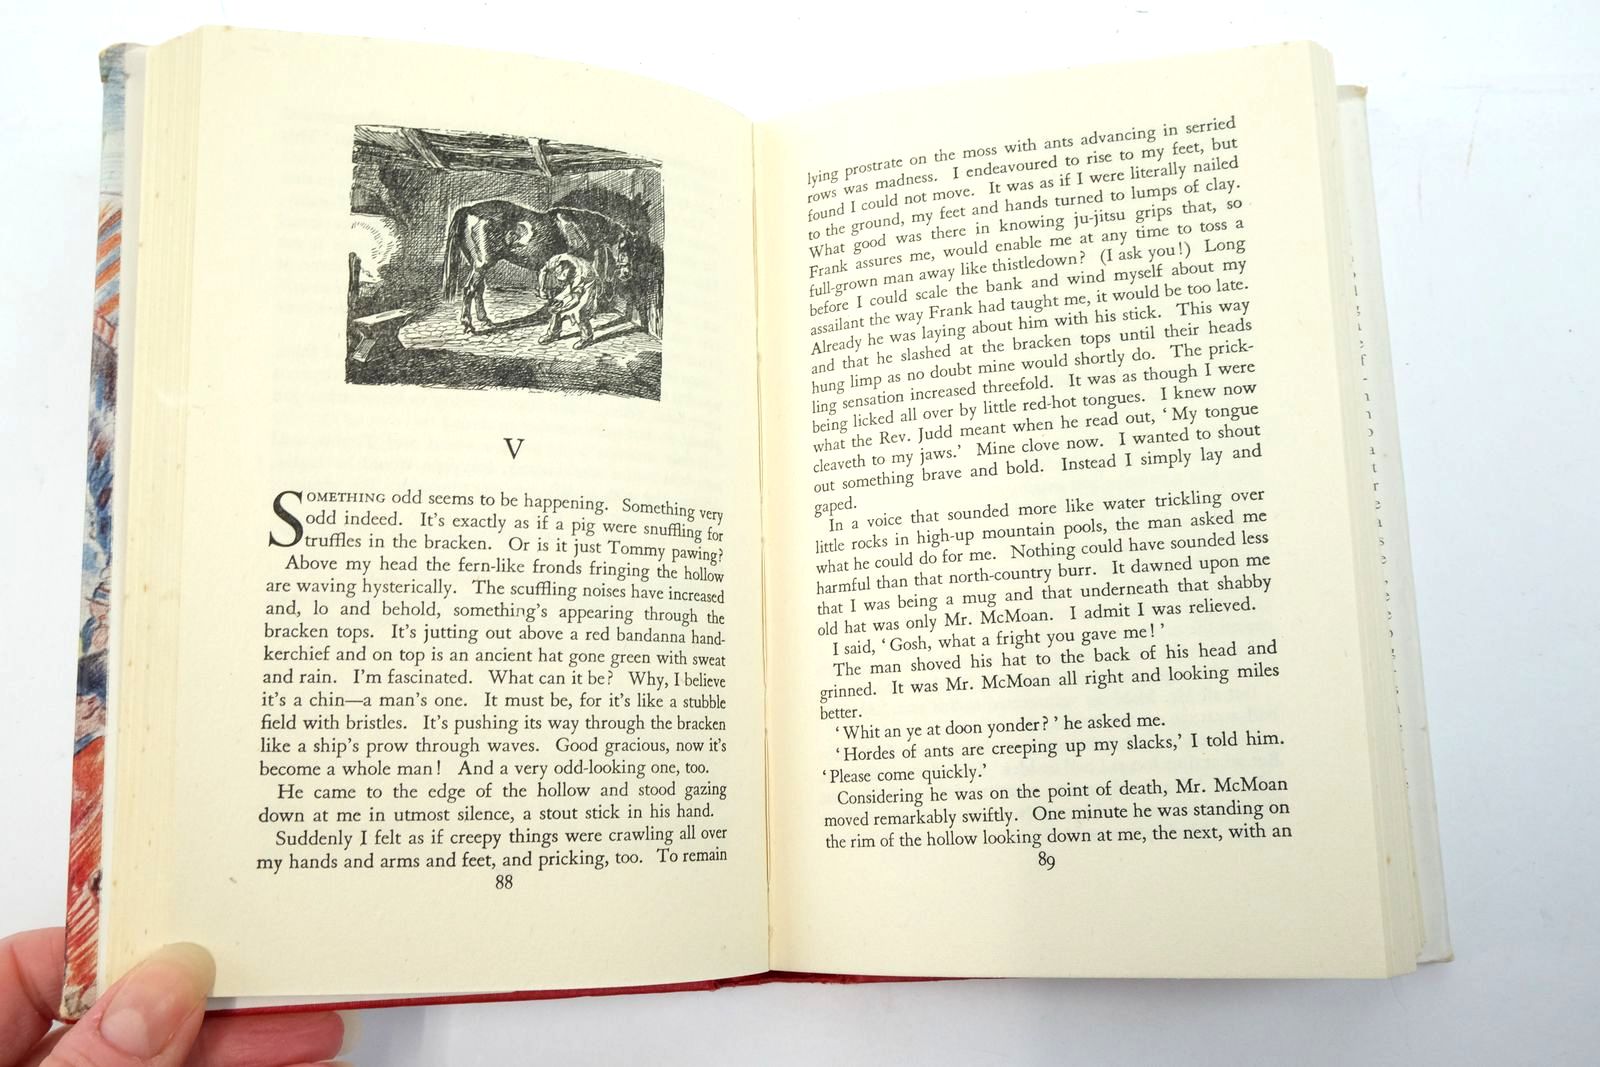 Photo of THE SILK PURSE written by Spooner, Glenda illustrated by Bullen, Anne published by Cassell & Company Ltd (STOCK CODE: 2137174)  for sale by Stella & Rose's Books